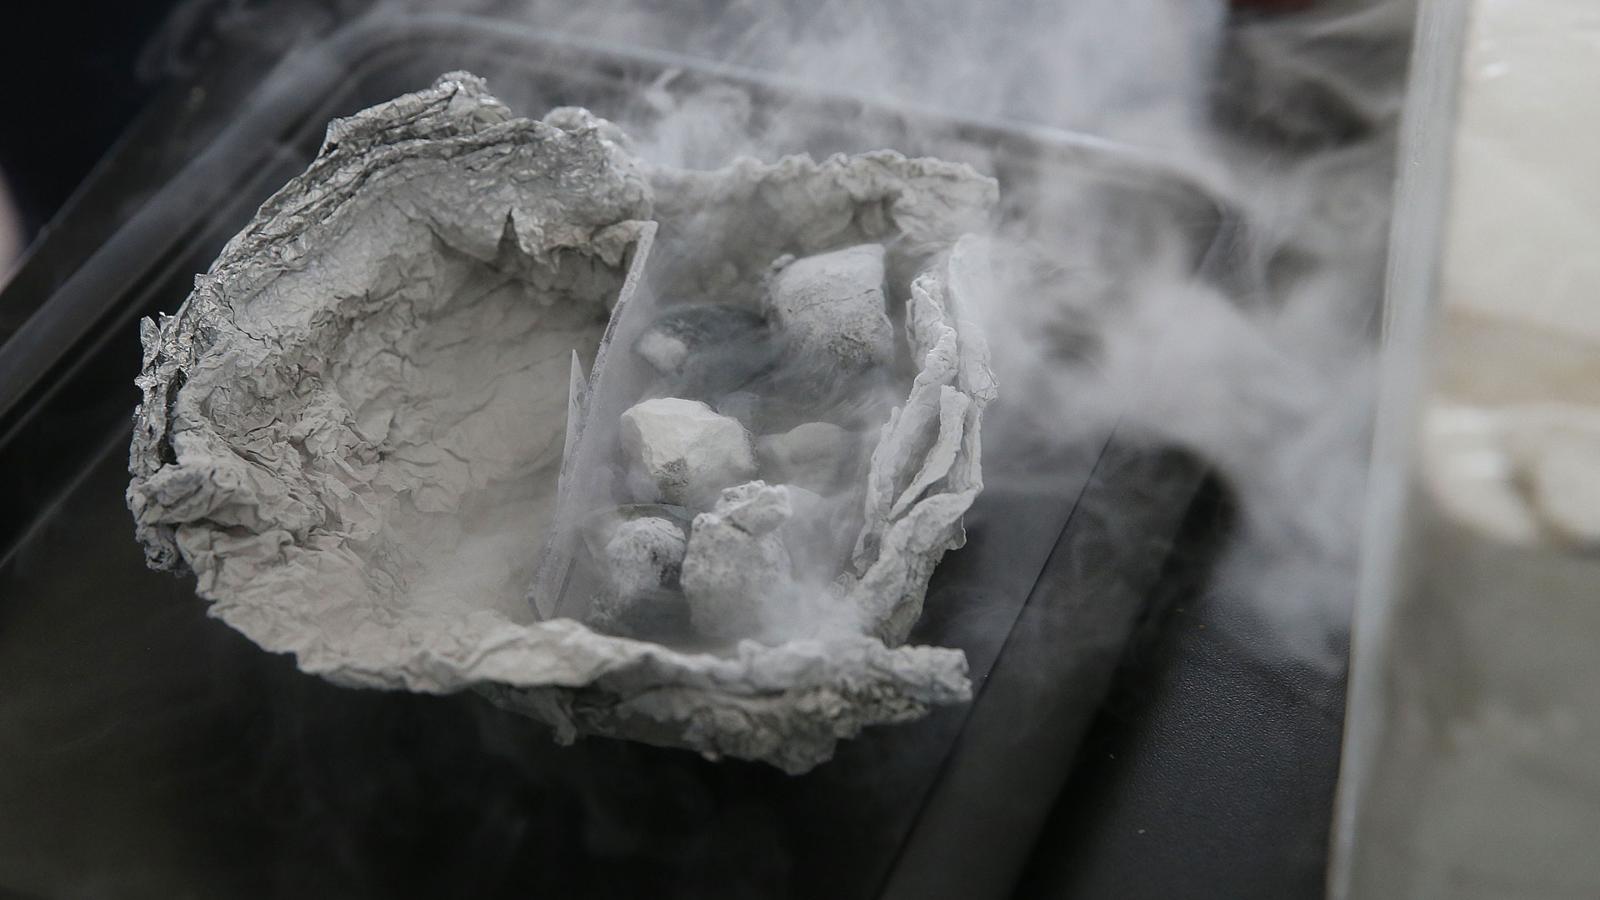 Flammable ice appears to smoke as it melts (Credit: Getty Images)